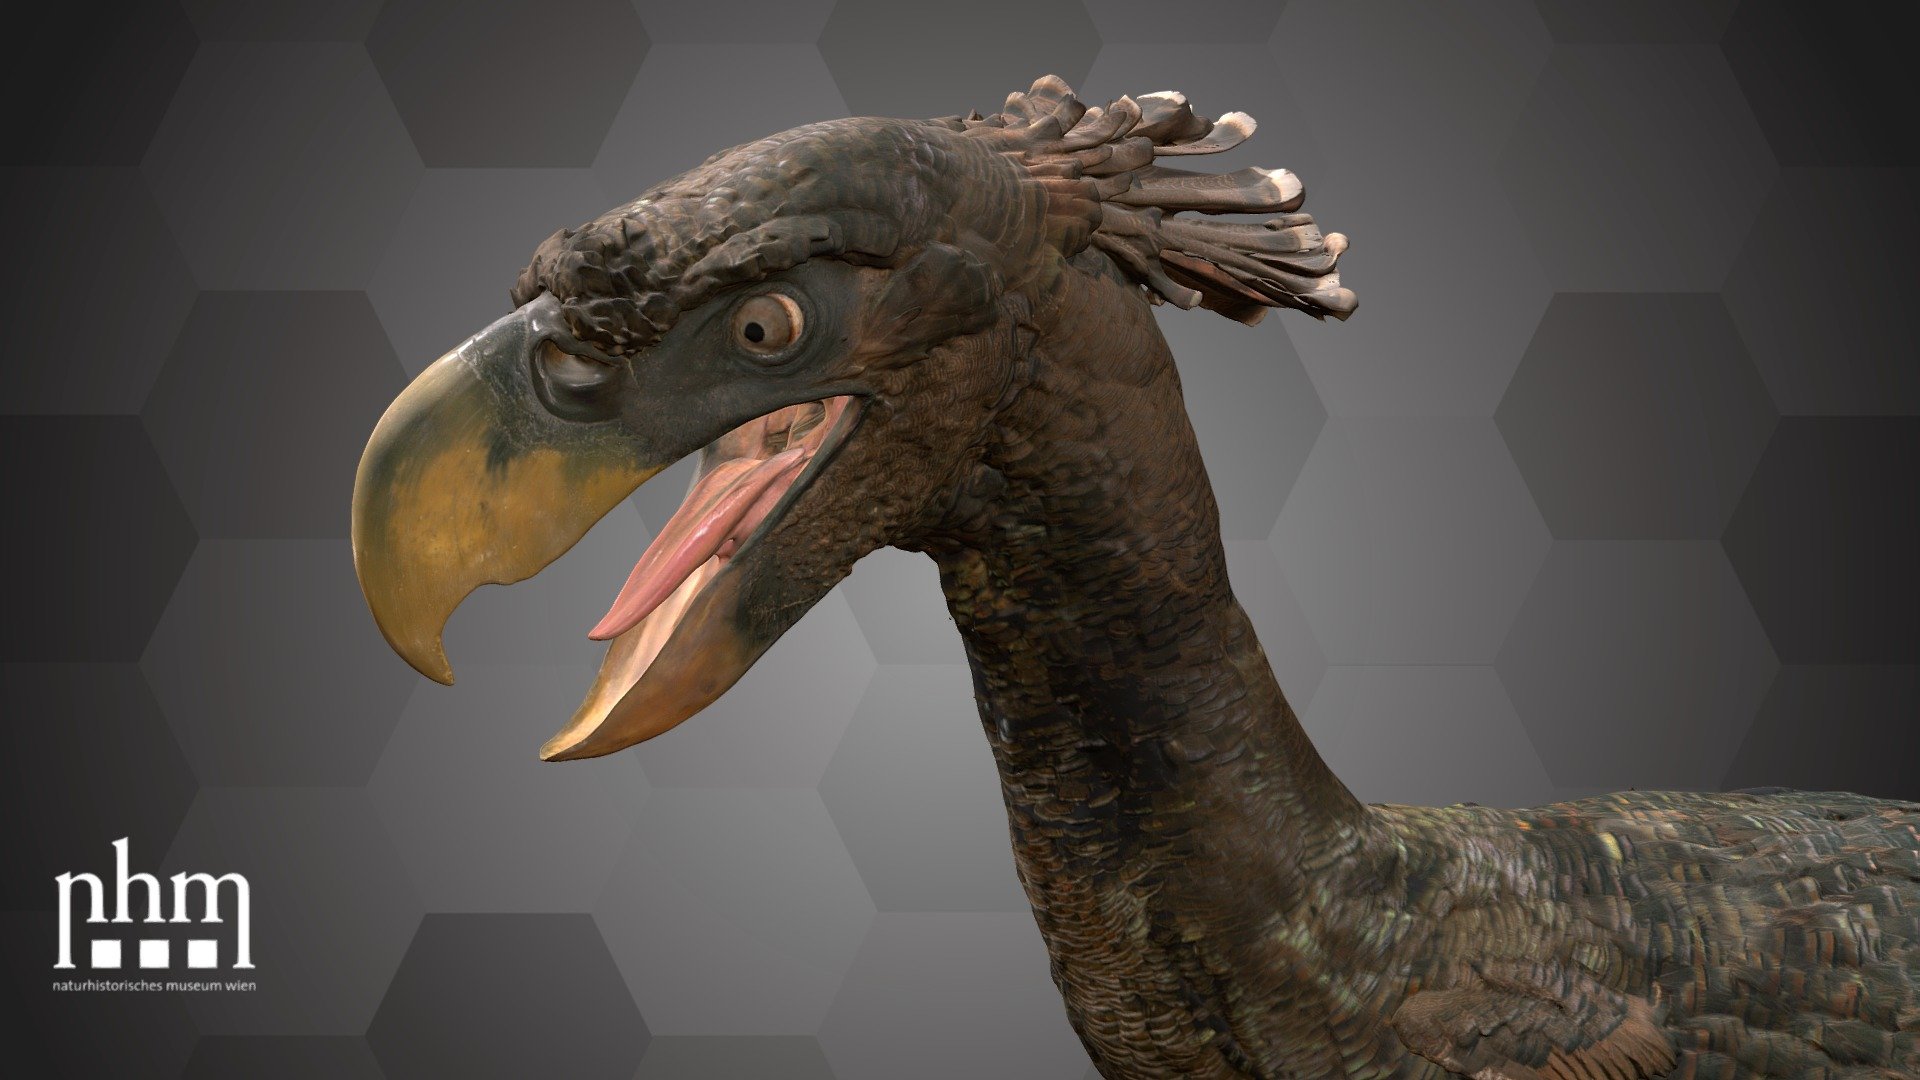 3D scan of a Terror-bird model from the species Paraphysornis brasiliensis. Members of the Phorusrhacidae family are commonly known under the term “Terror-birds”. Species of these apex predators could reach a height up to 3 meters! They lived mainly in South America from the early Tertiary (55 million years ago) until the late glacial period. 

This model can be found in Hall 9 at the NHM Vienna.

Specimen: Paraphysornis brasiliensis (Alvarenga, 1982)

Inventory number: NHMW-Geo 2012/0007/0001

Collection: Natural History Museum Vienna, Geology &amp; Paleontology Dept., Vertebrate Coll. (curator: Ursula Göhlich)

Find out more about the NHMW here.

Scanned and edited by Nikola Brodtmann, Anna Haider &amp; Viola Winkler (NHMW)

Scanner: Artec Leo. Infrastructure funded by the FFG 3d model